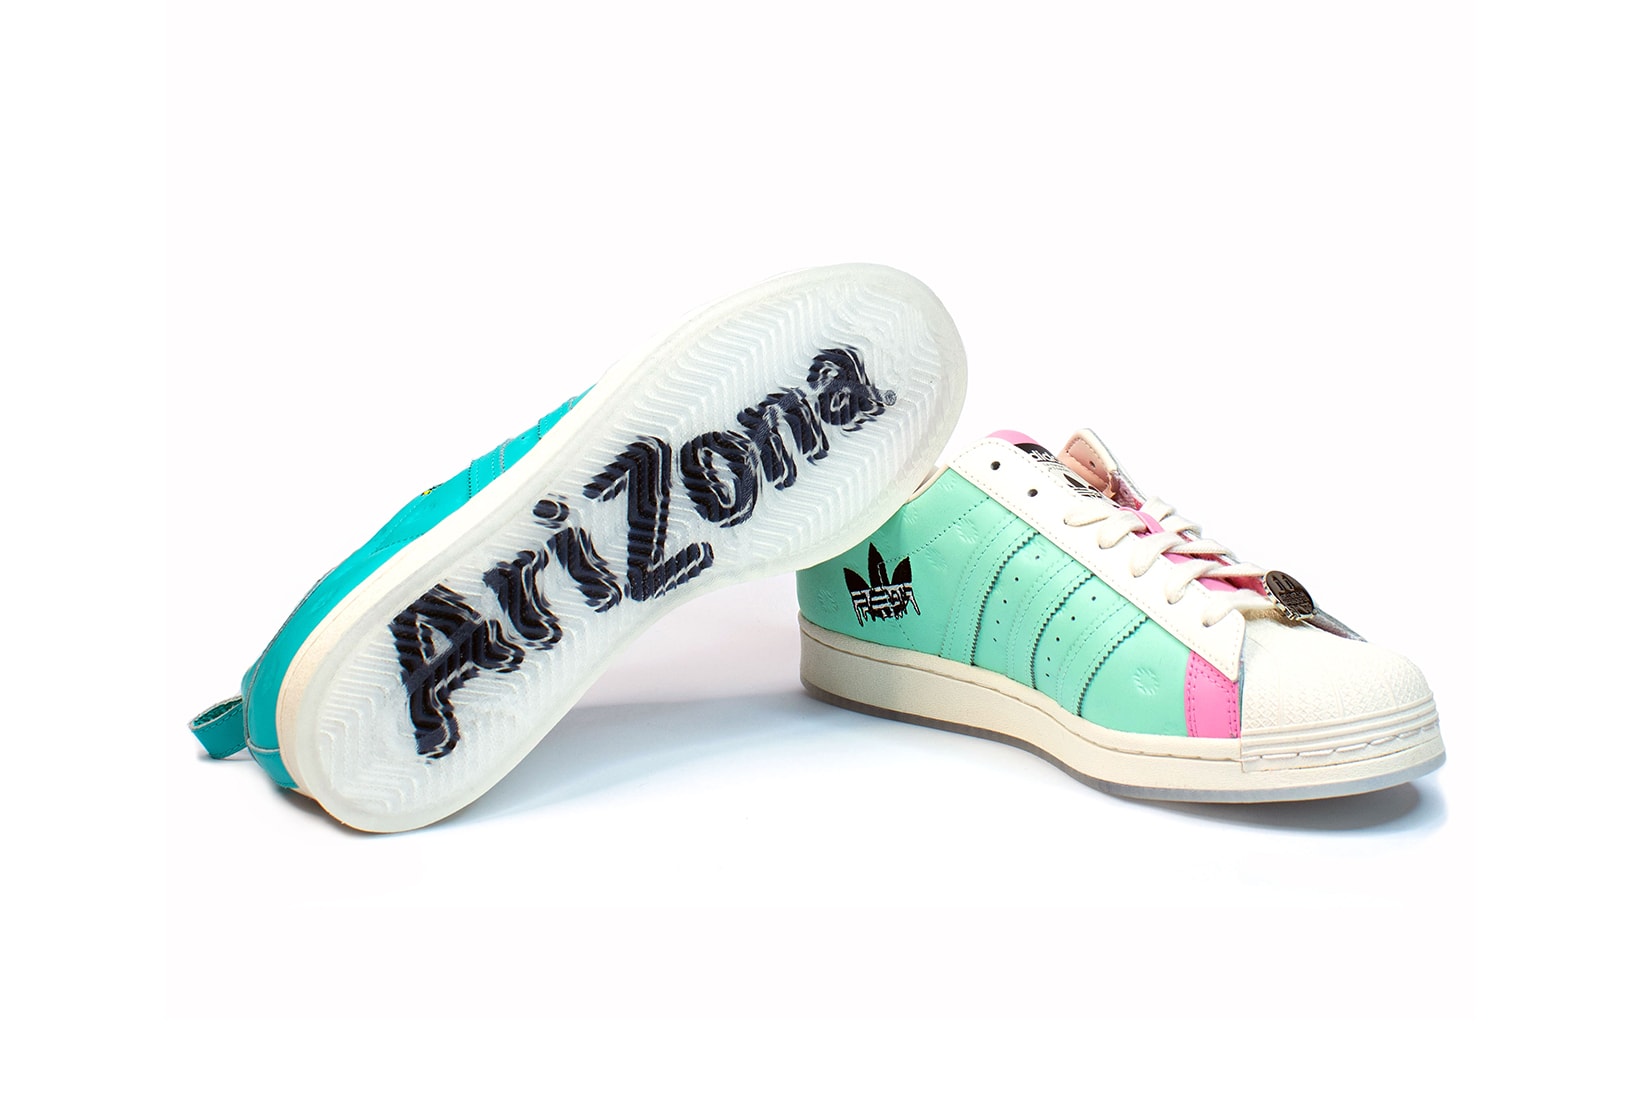 adidas originals arizona iced tea superstar collaboration sneakers big cans sole laces white blue teal pink gold